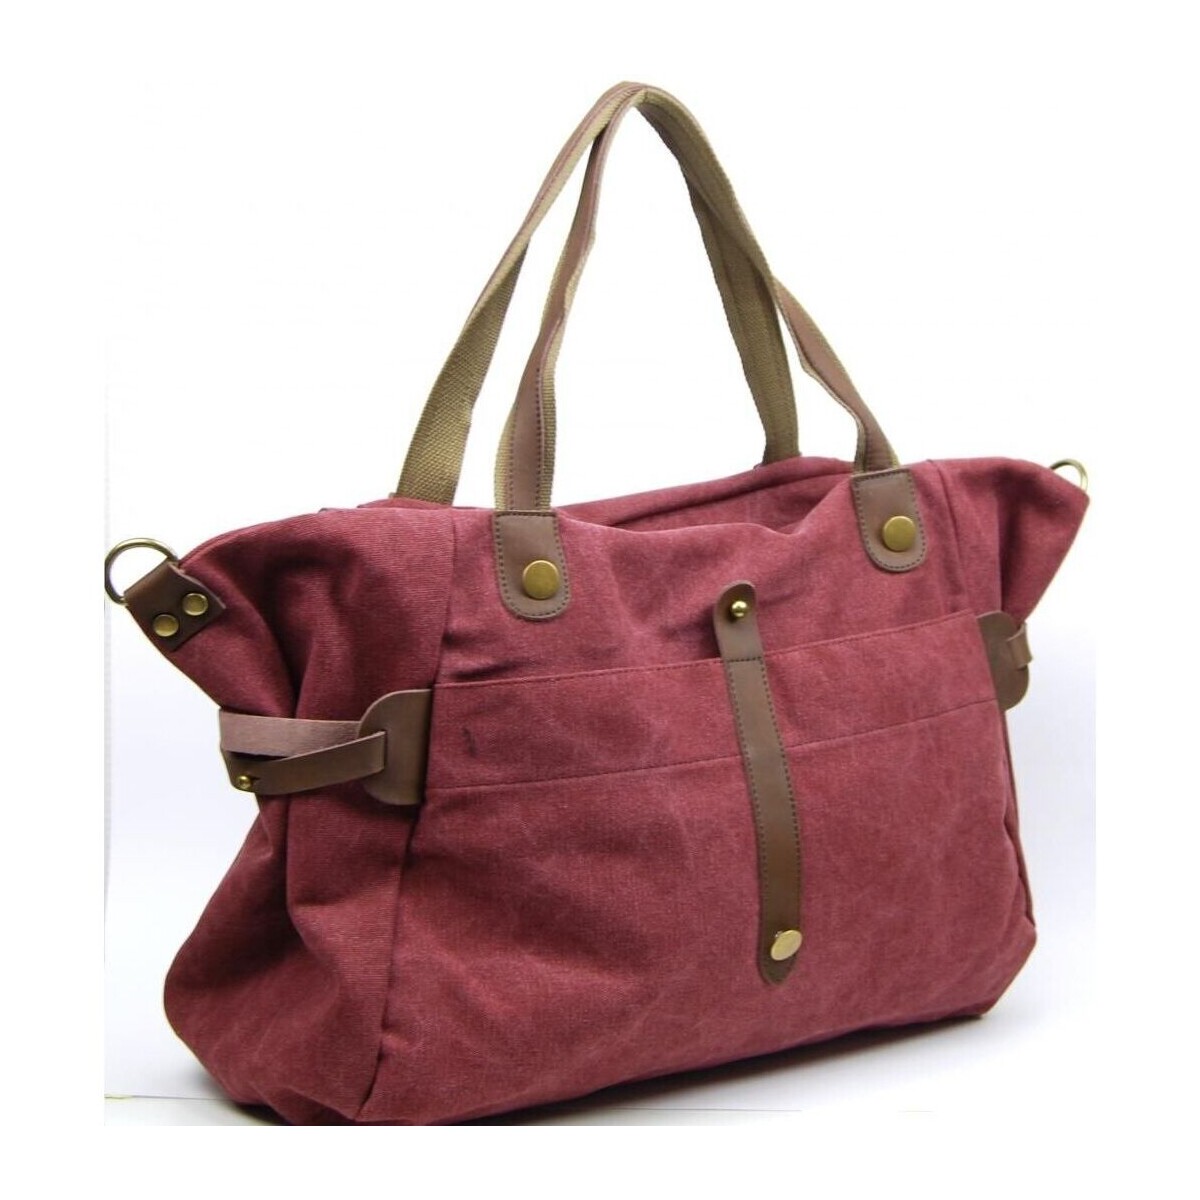 Sacs Sacs de voyage It s my favorite of the bunch a really great spring weekend bag FIDJI Rouge